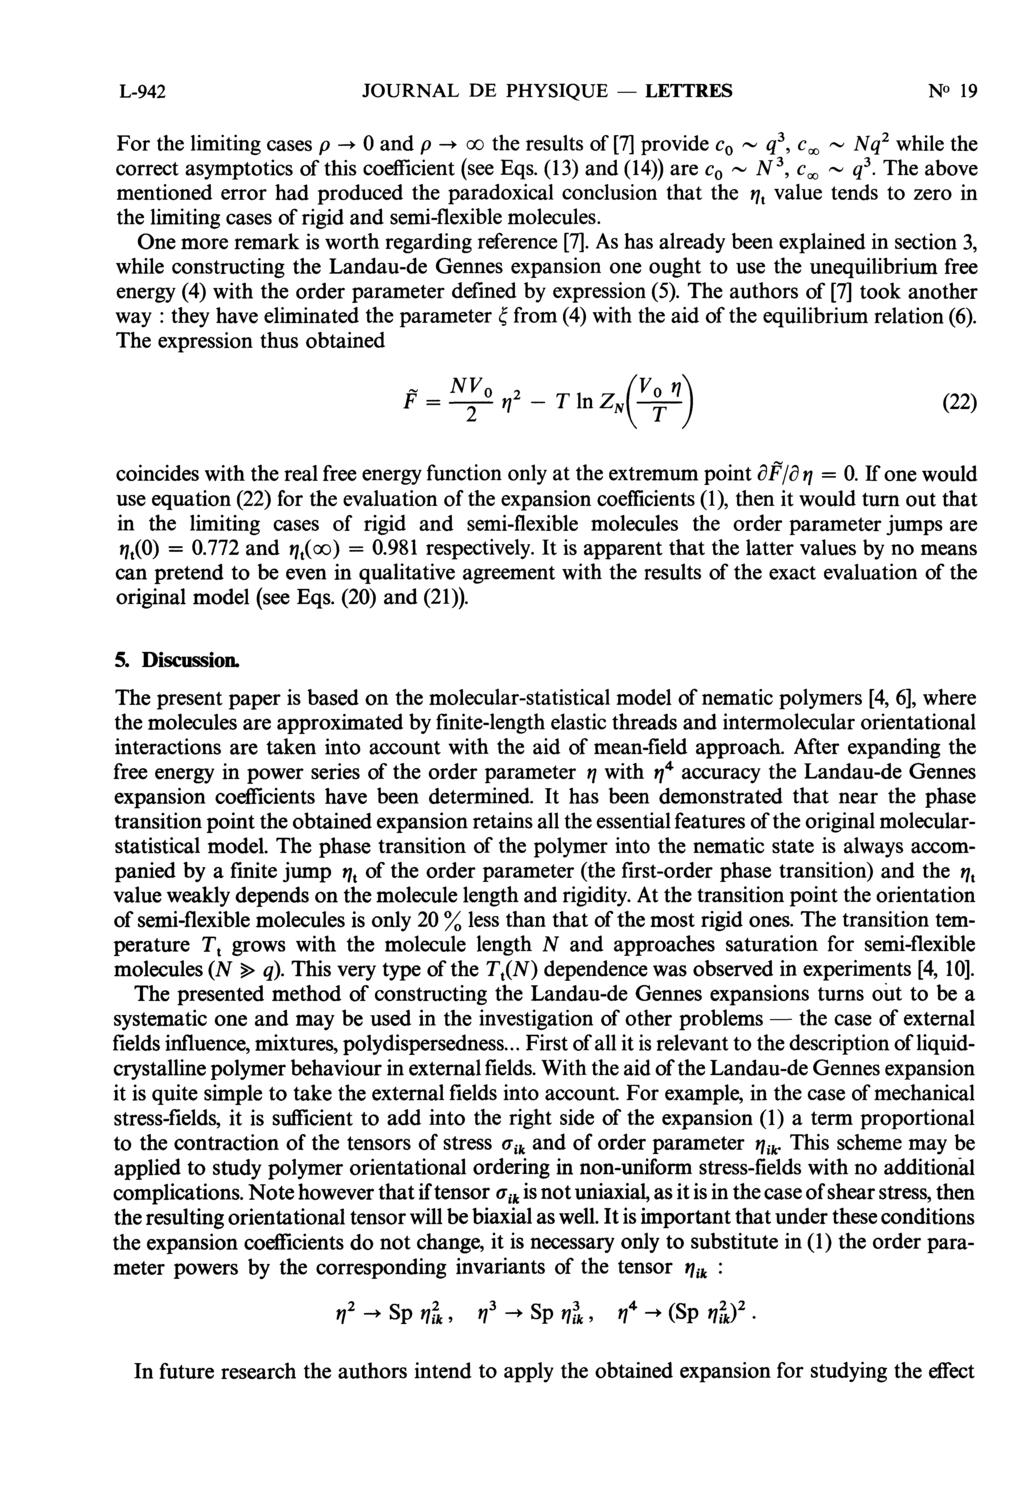 L-942 JOURNAL DE PHYSIQUE - LETTRES For the limiting cases p --~ 0 and p -~ oo the results of [7] provide Co " q3, c~ 2013 Nq2 while the correct asymptotics of this coefficient (see Eqs.